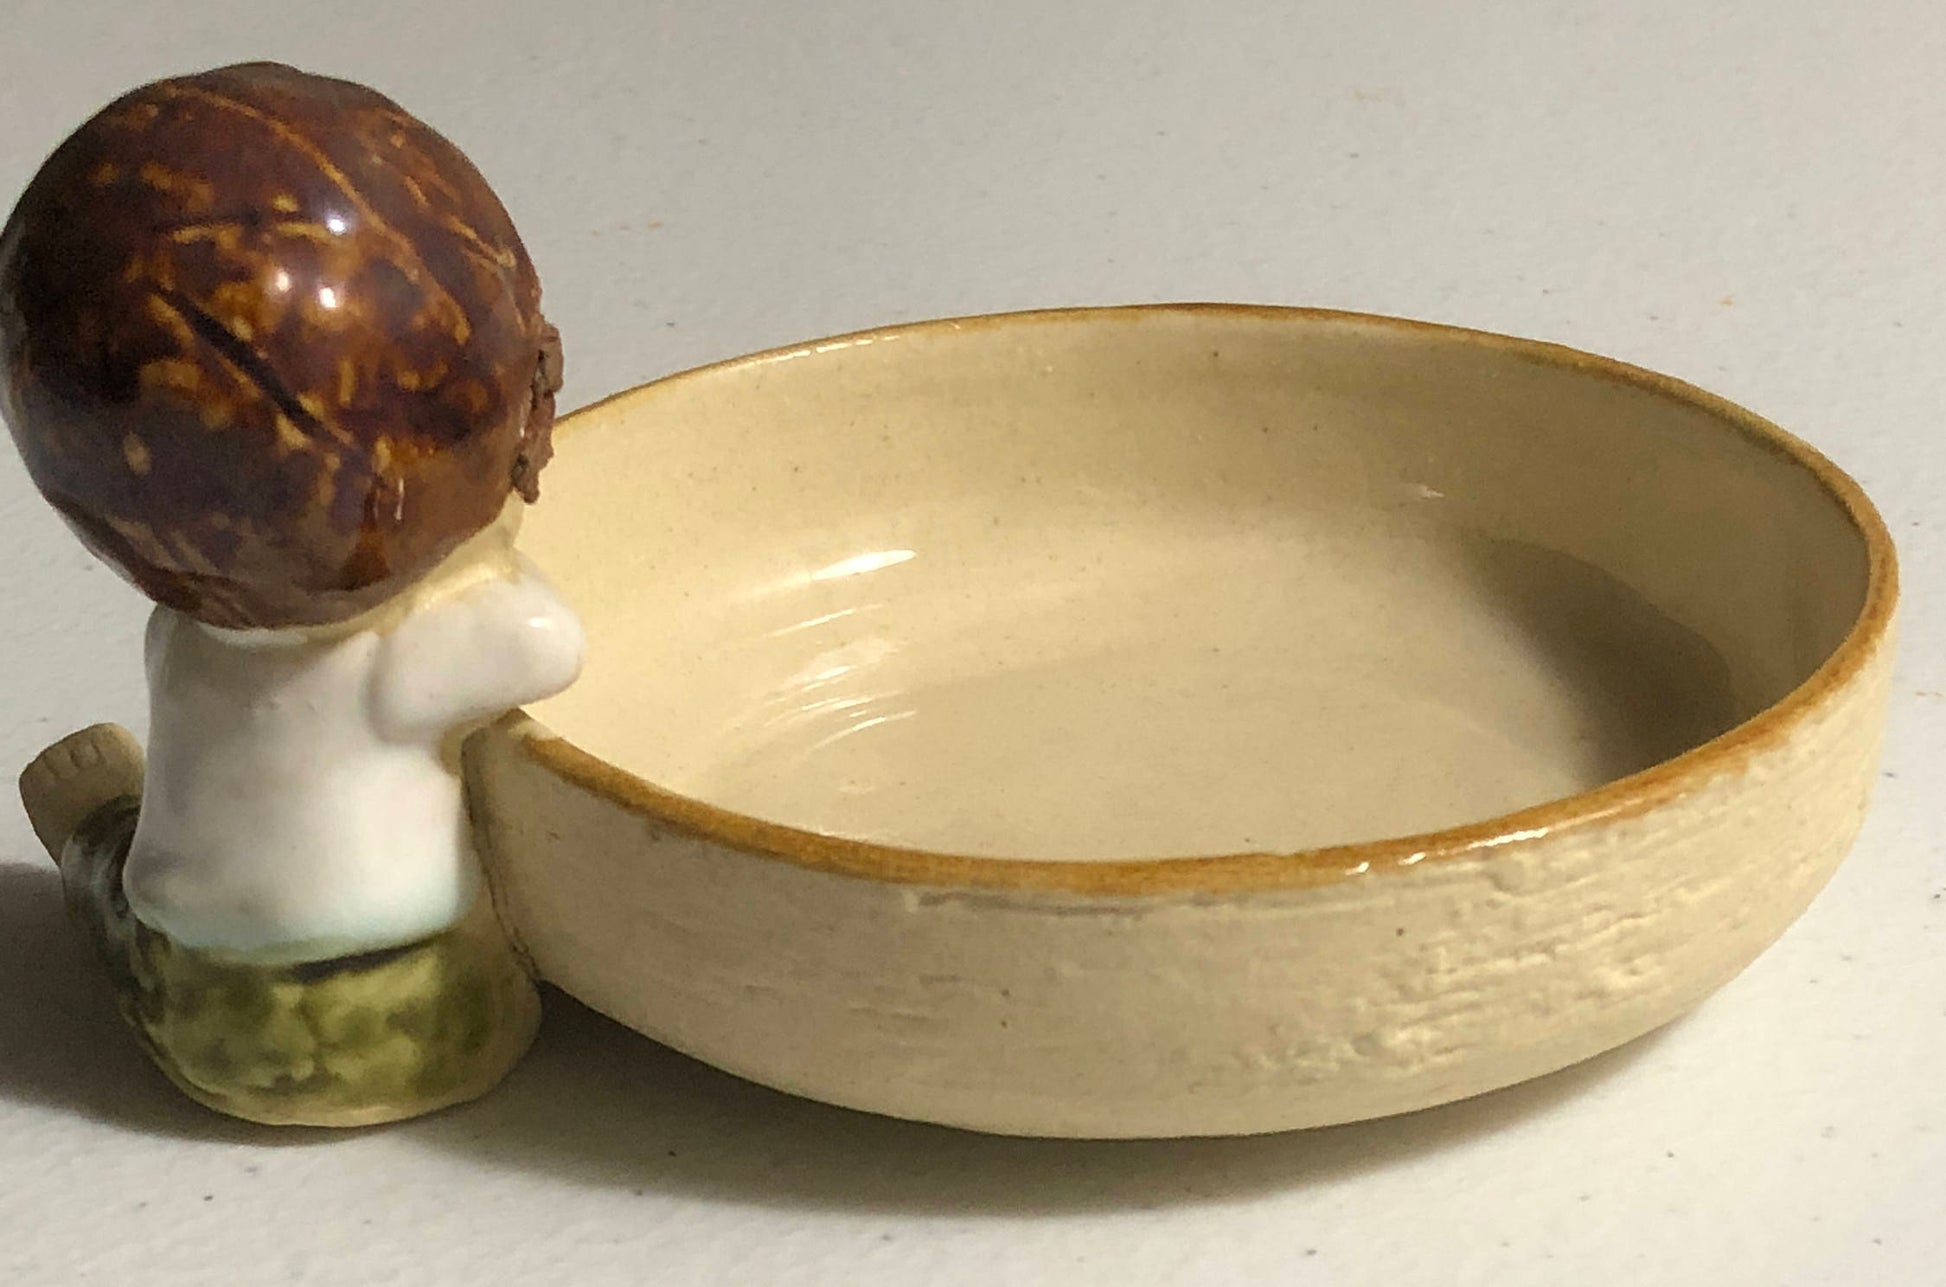 Small Cute Little Long Hair Boy wearing a Ball Cap, Vintage Collectible Ceramic Jewelry Dish